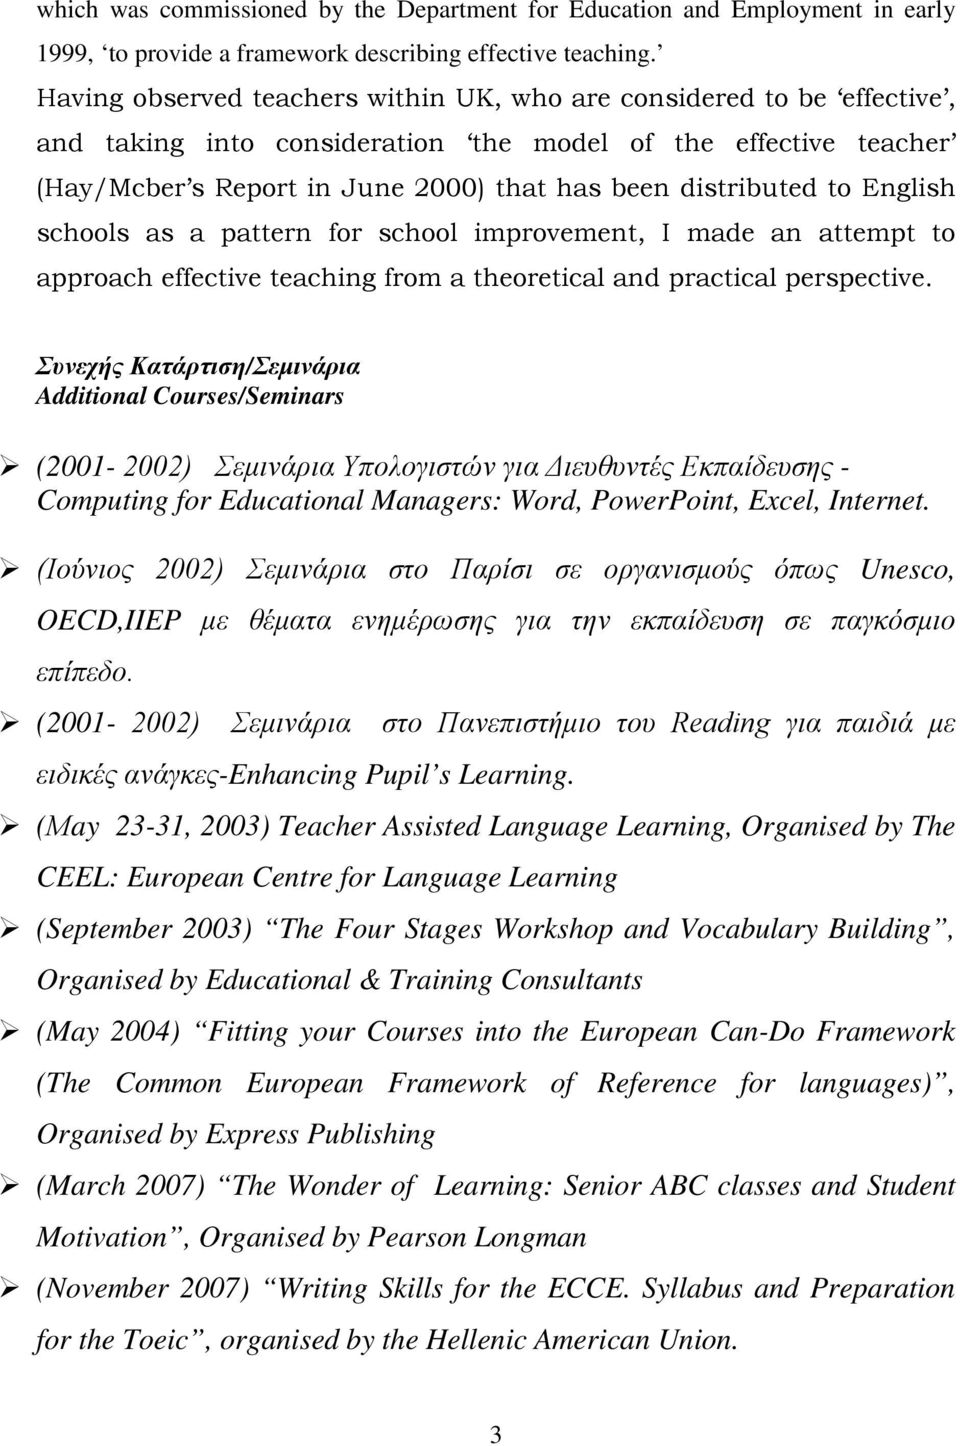 English schools as a pattern for school improvement, I made an attempt to approach effective teaching from a theoretical and practical perspective.